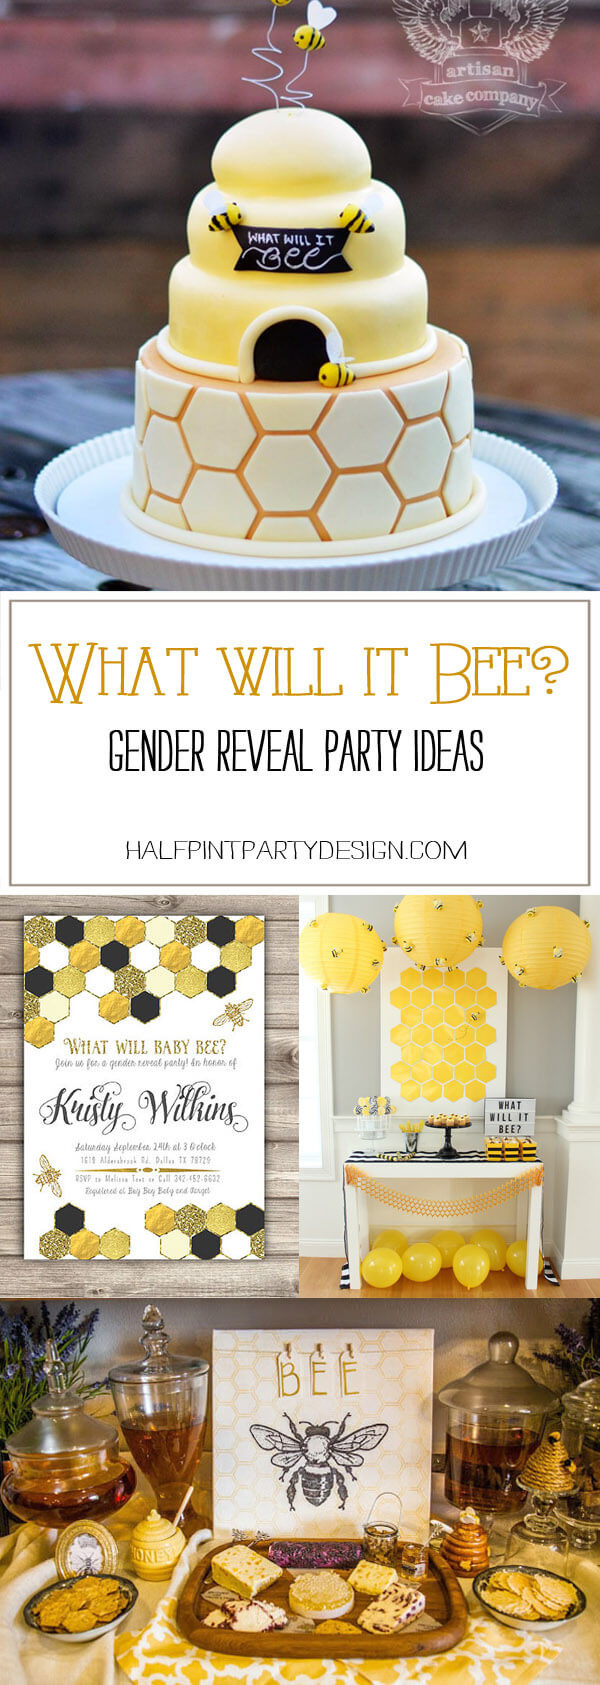 Good Ideas For A Gender Reveal Party
 What Will it Bee Gender Reveal Party Ideas Halfpint